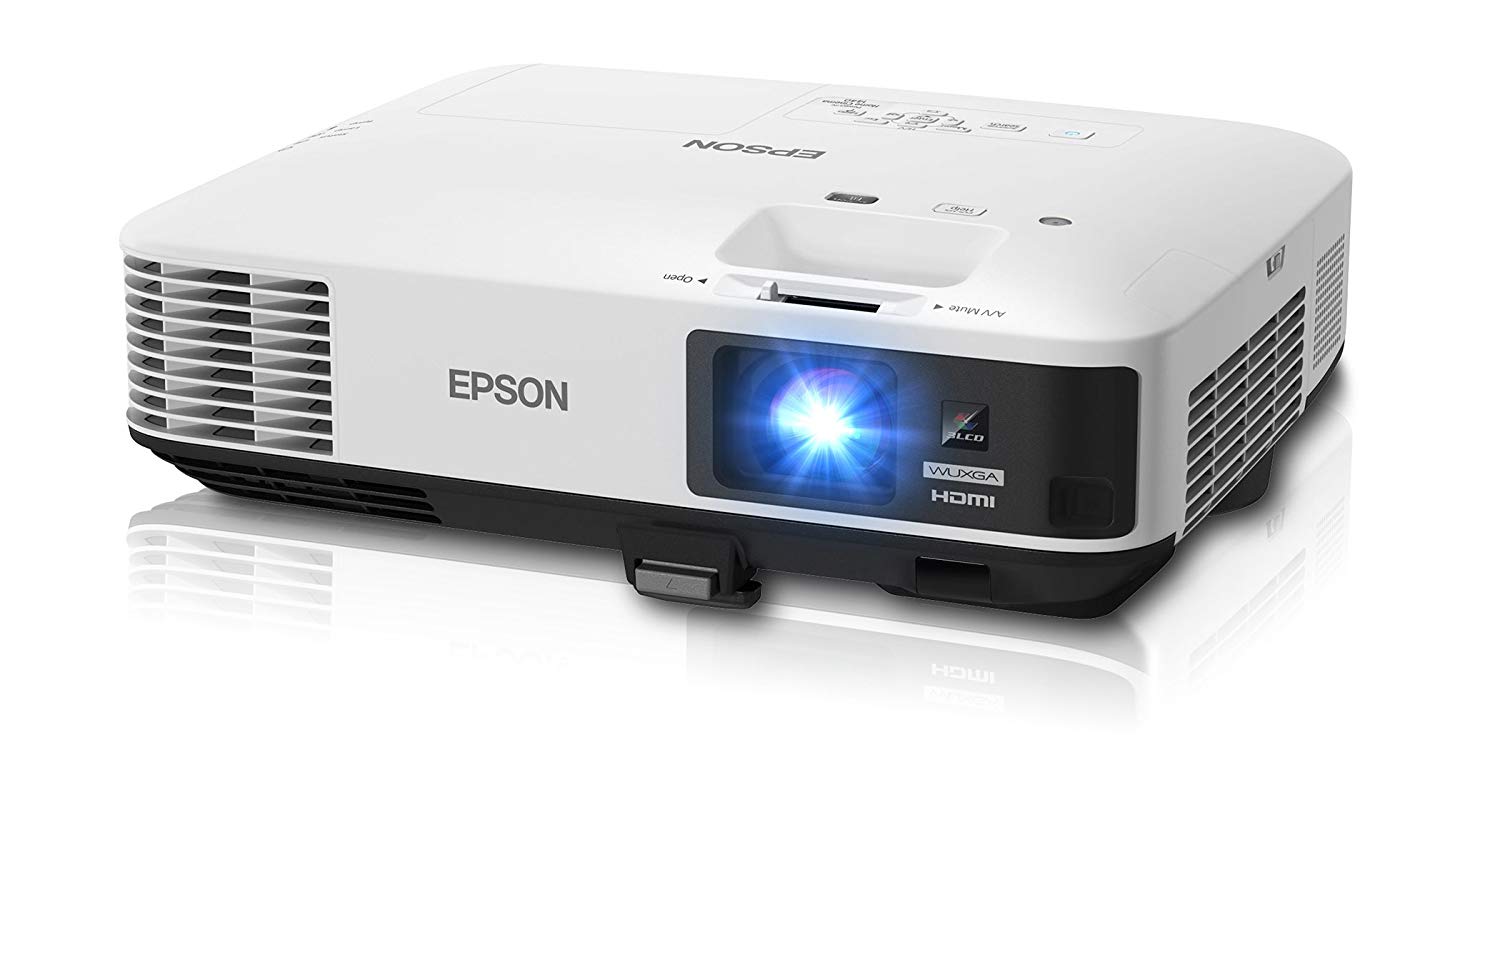 Epson Home Cinema 1440 1080p 4400 Lumens Color and White Brightness 3LCD Home Theater Projector